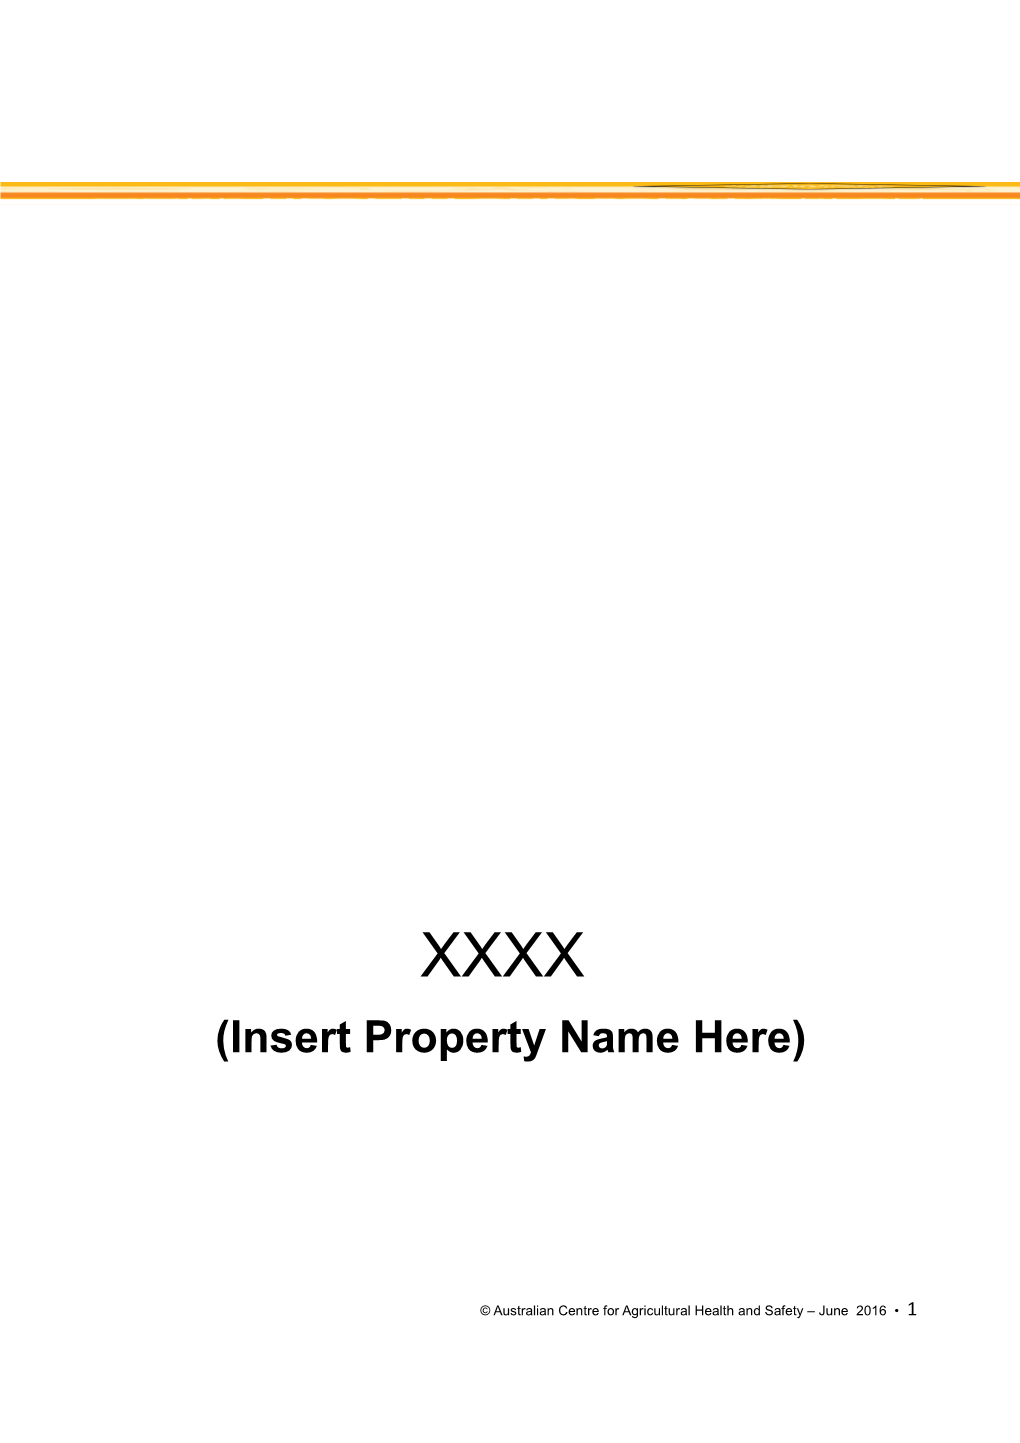 Insert Property Name Here